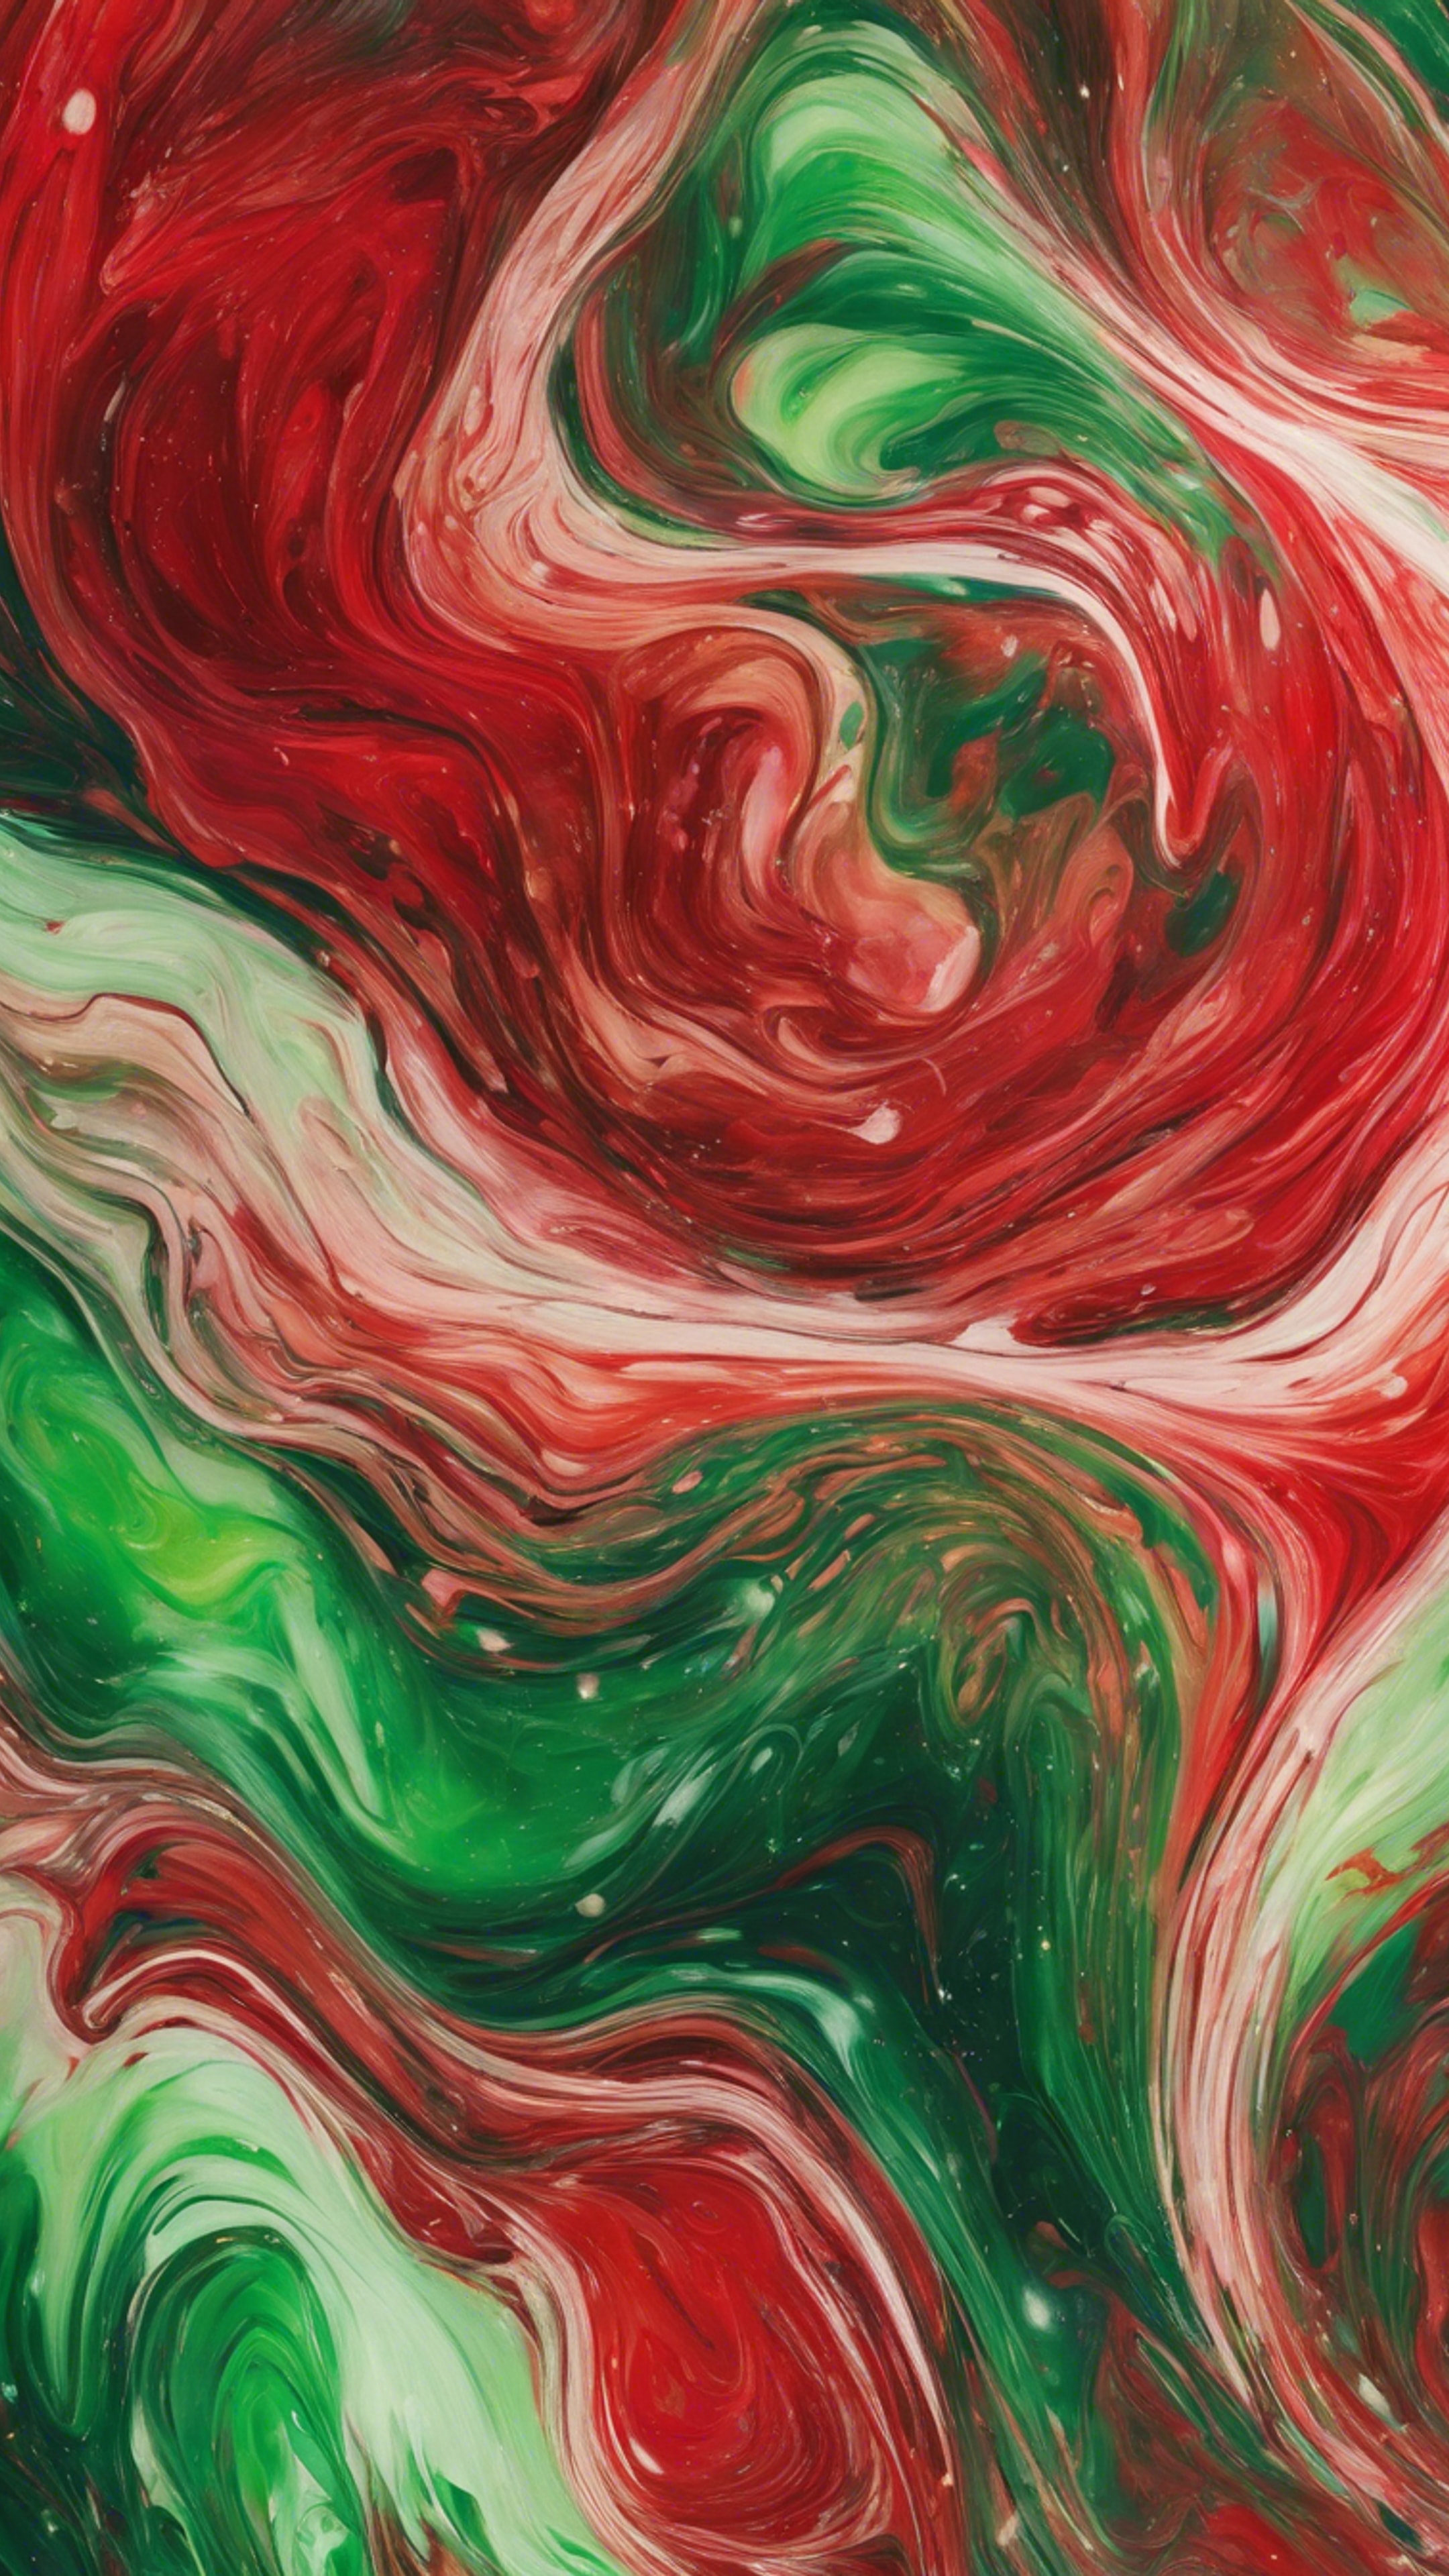 A vivid painting of swirling red and green abstract patterns Tapet[5978fc4bccef4bcc8a58]